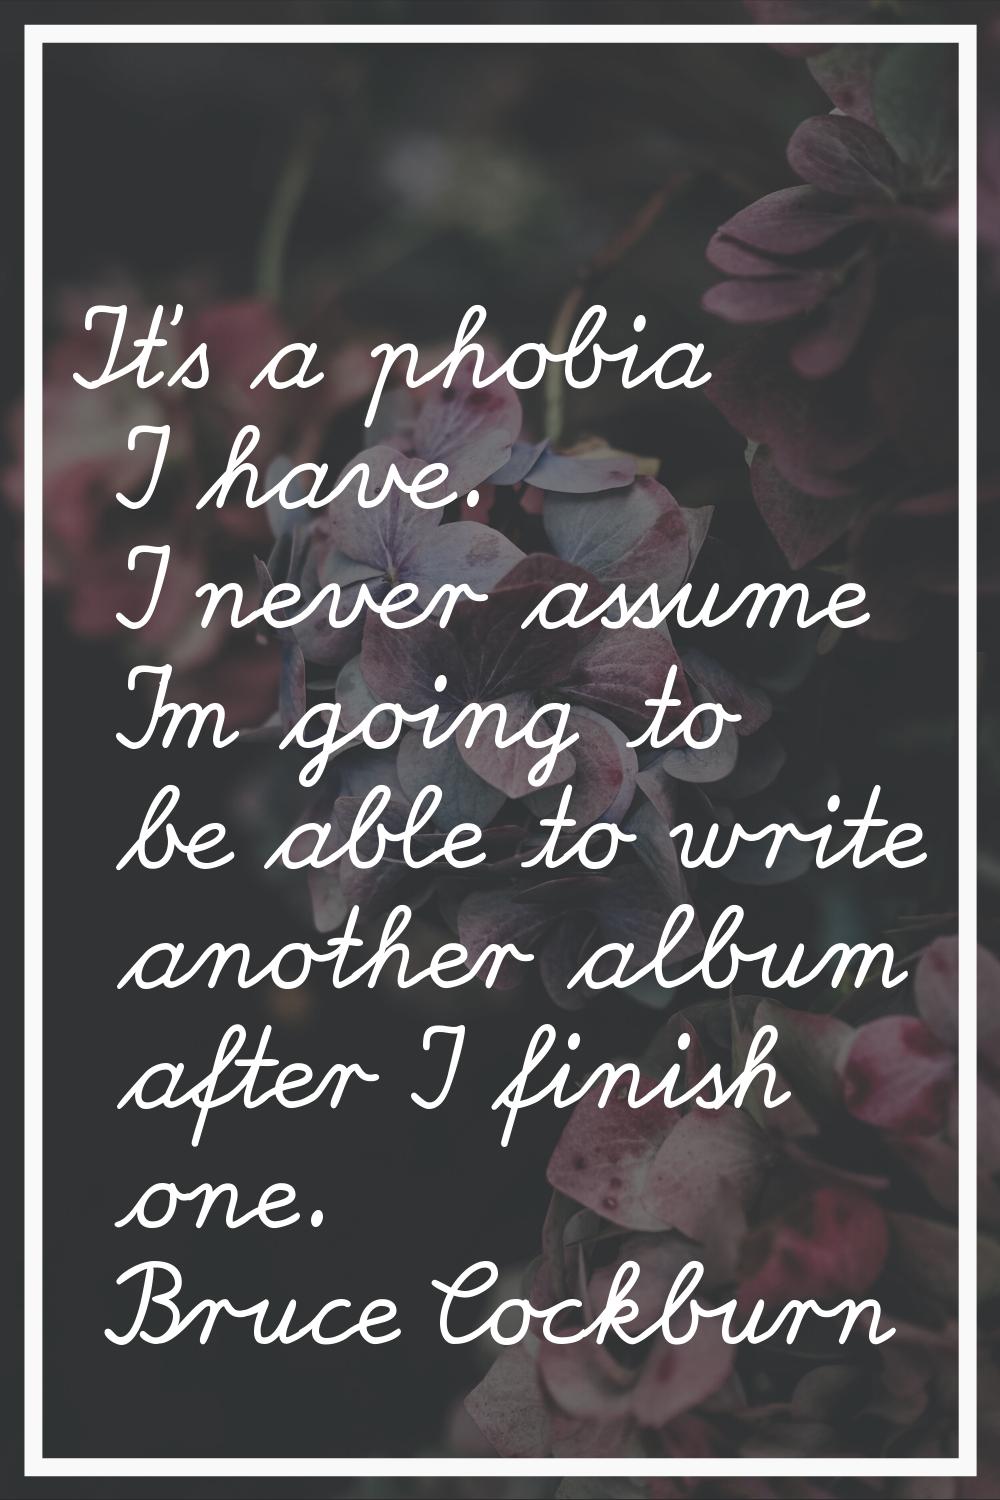 It's a phobia I have. I never assume I'm going to be able to write another album after I finish one